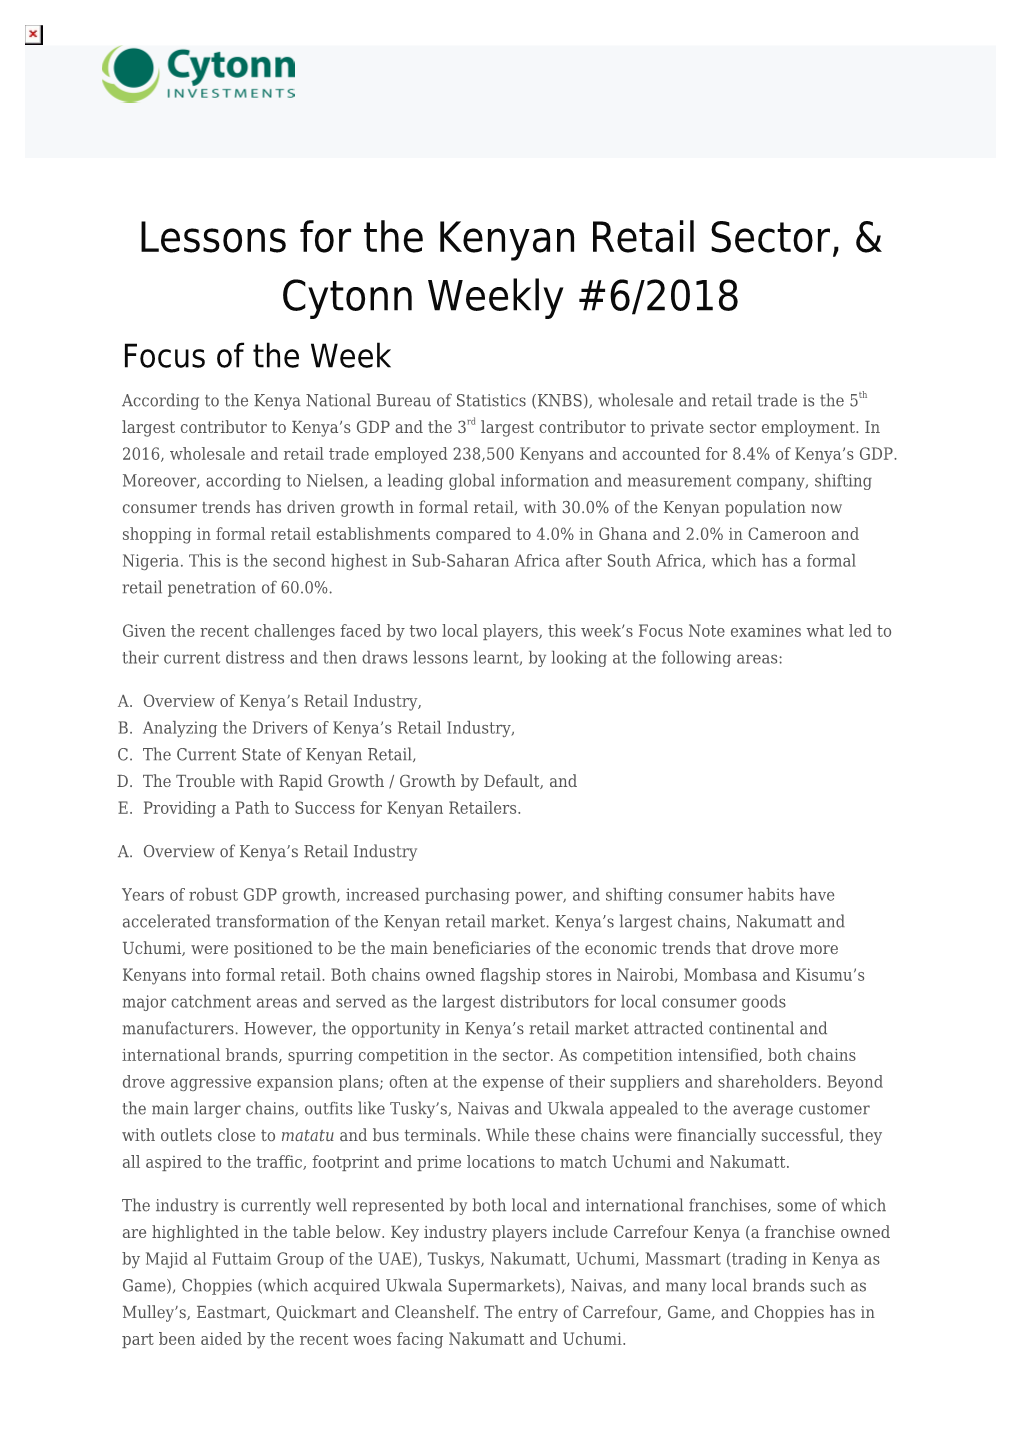 Lessons for the Kenyan Retail Sector, & Cytonn Weekly #6/2018